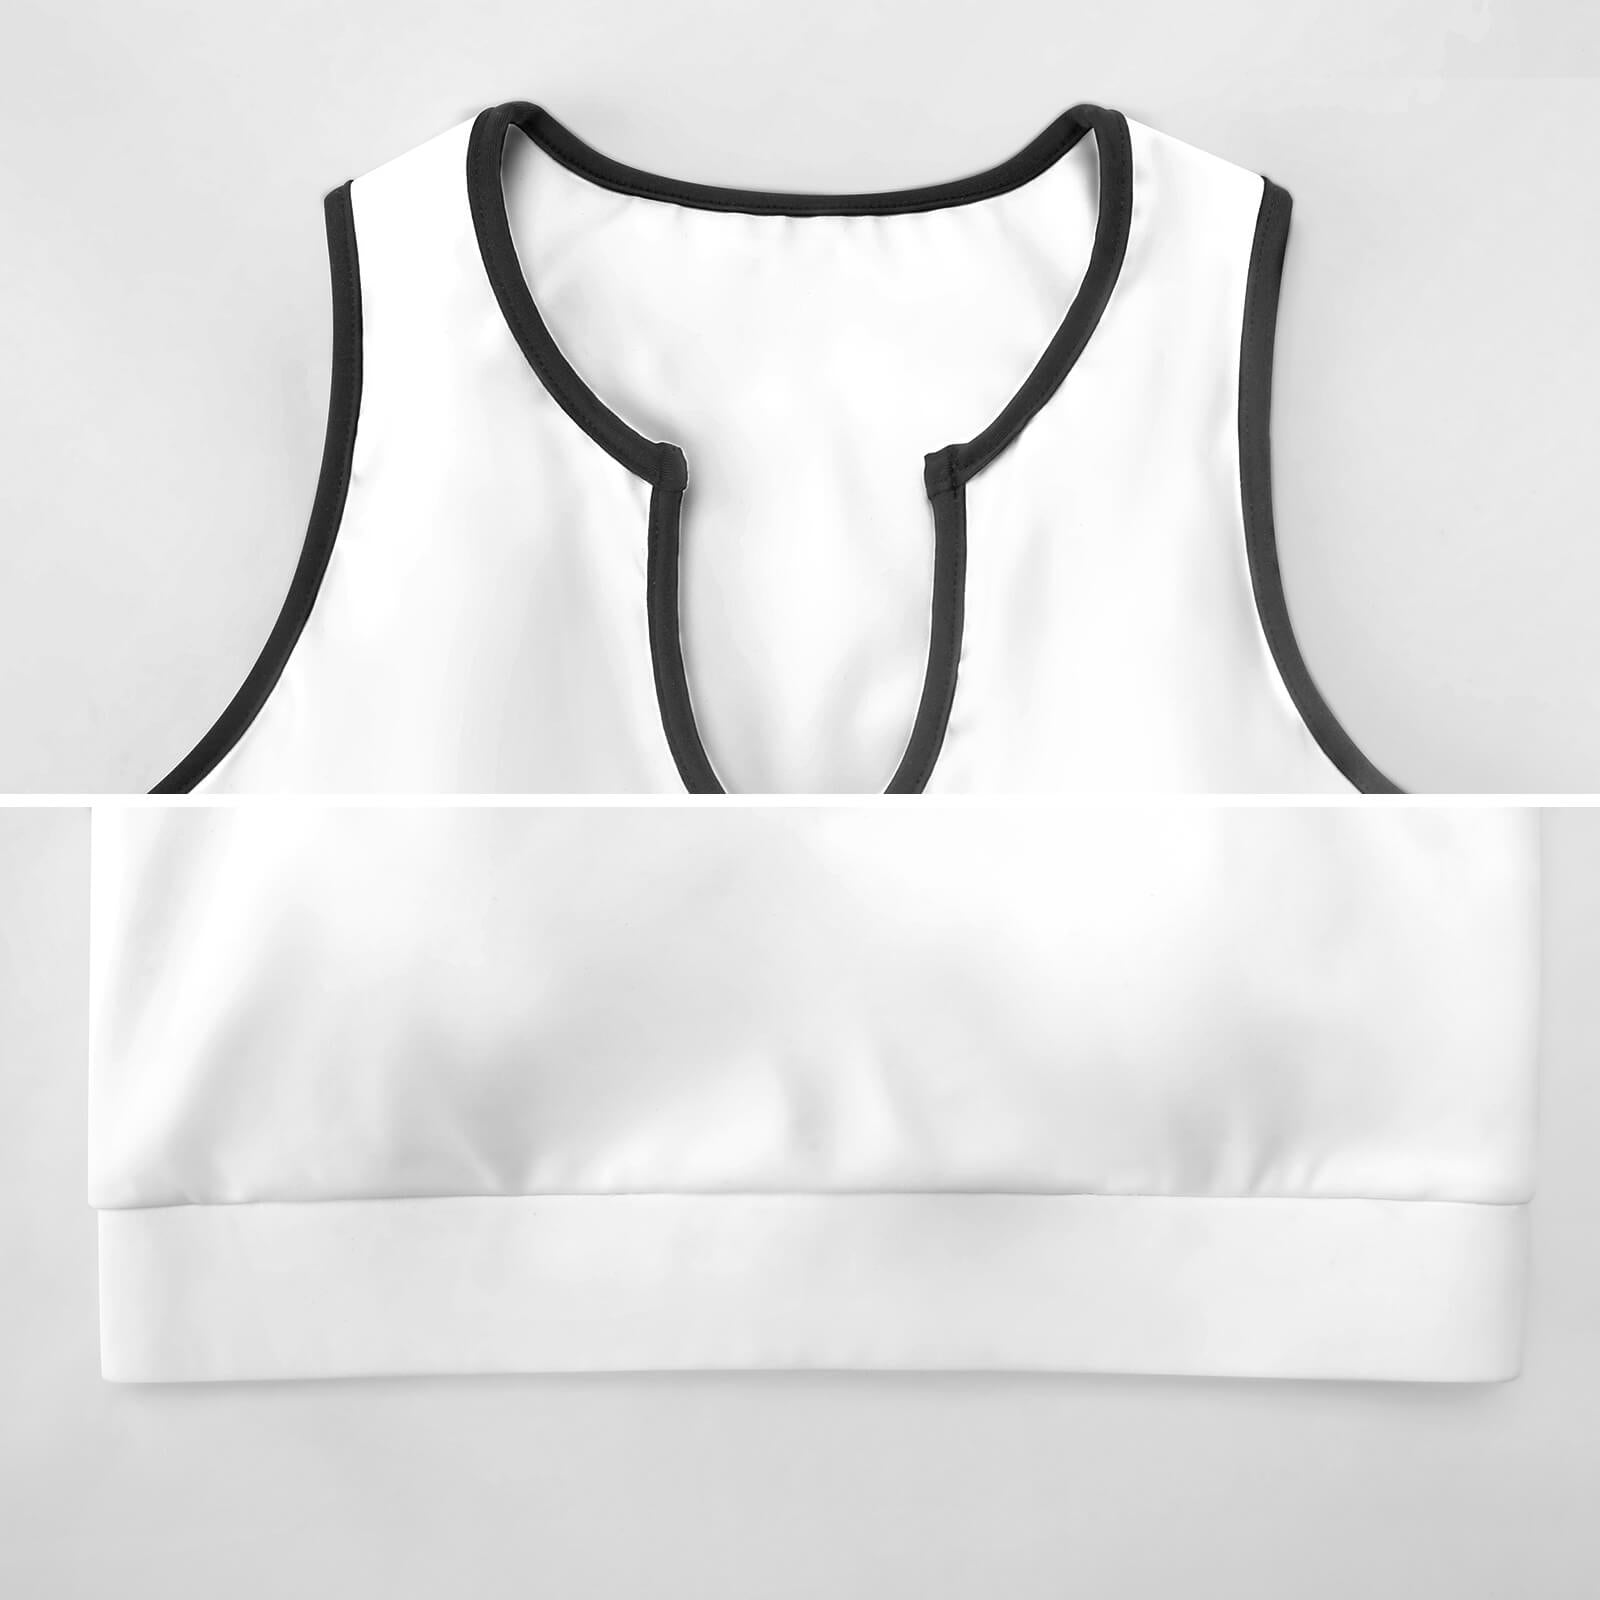 The Gathering Yoga Top